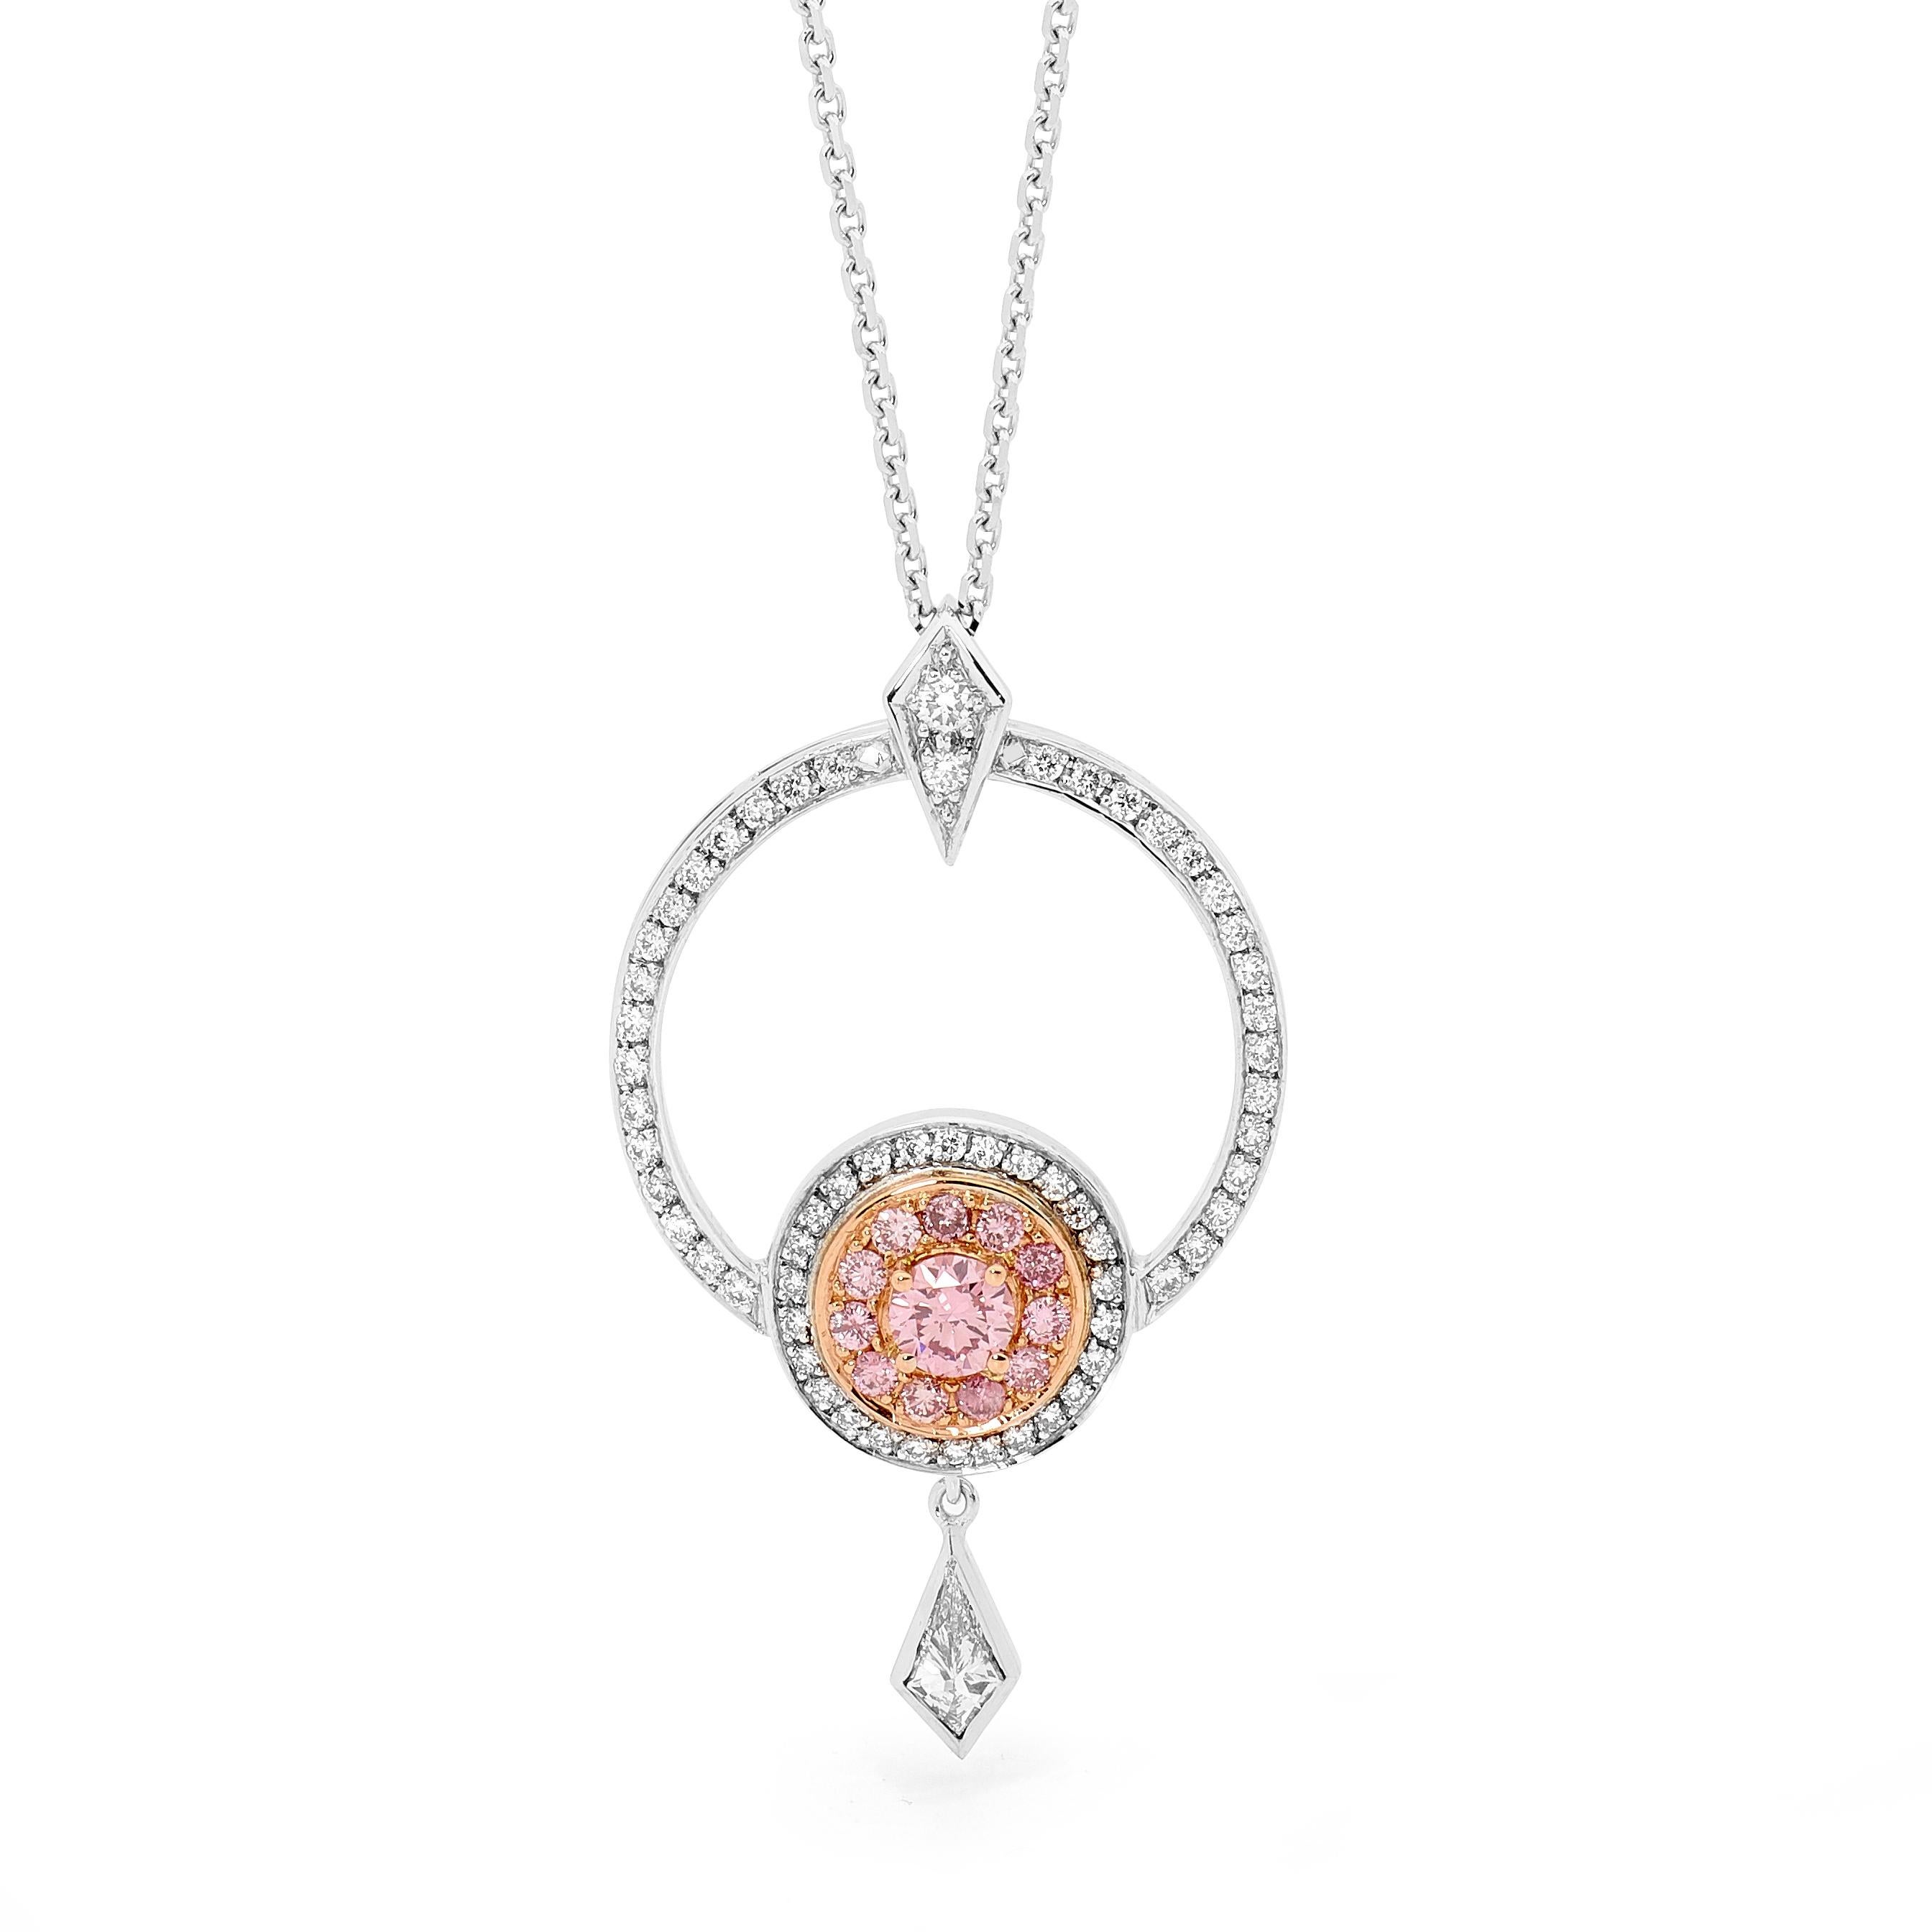 This beautiful collection features the rare and iconic Australian Argyle Pink diamonds. Our Pink Diamond Friendship Earrings are perfectly paired with the Pink Diamond Friendship Pendant and feature 0.20ct Round Brilliant Cut Argyle Pink Diamonds at